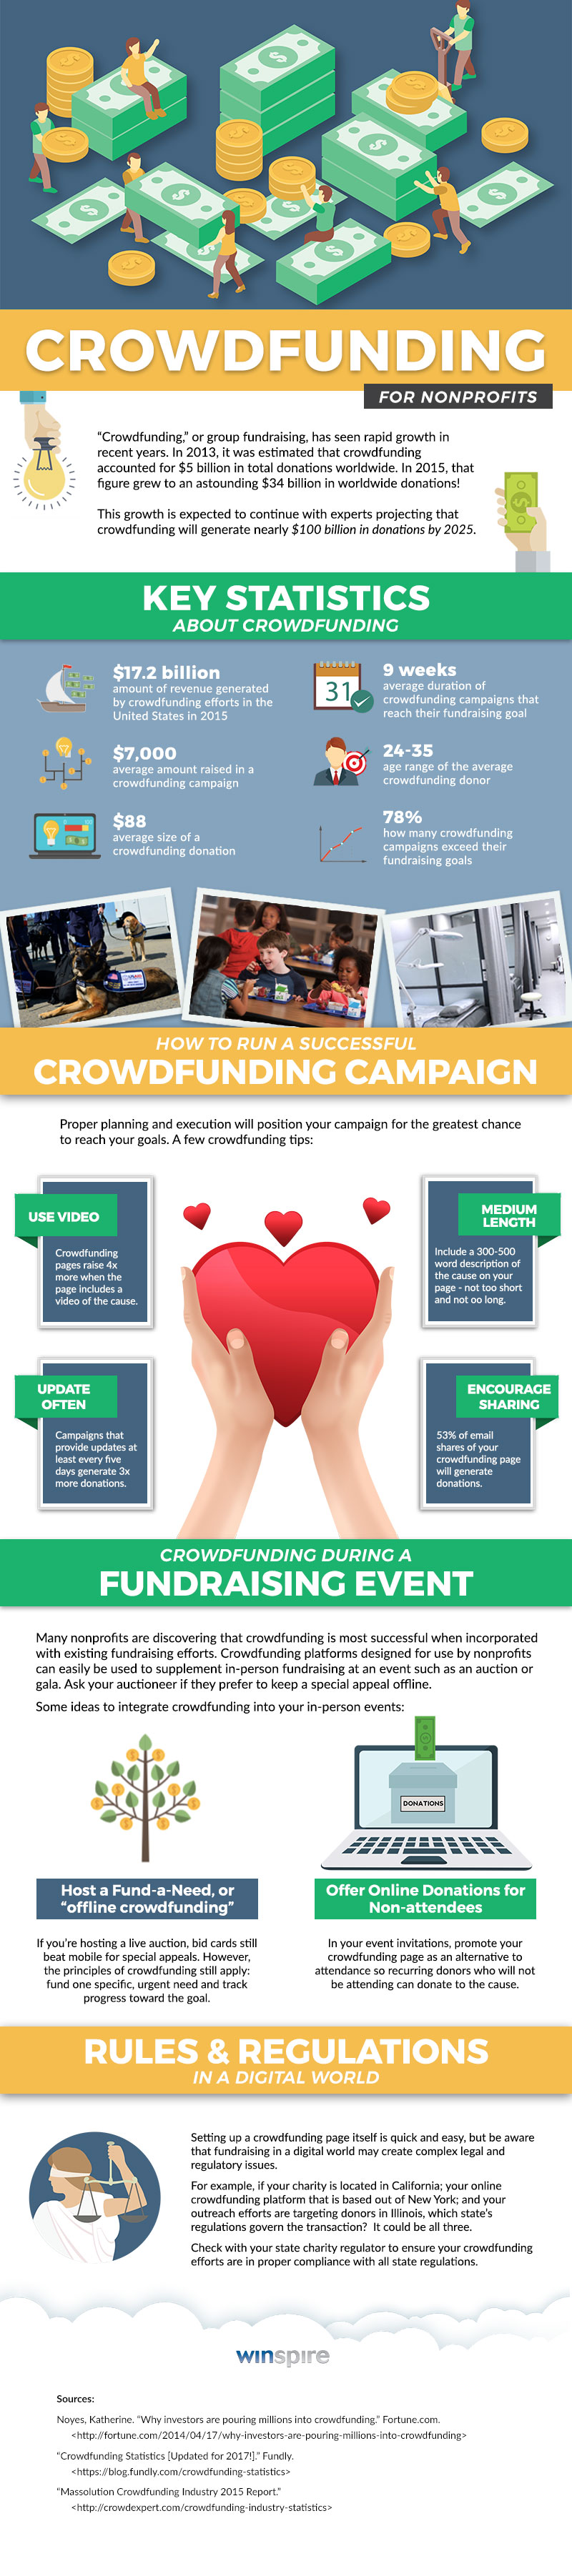 Crowdfunding for Nonprofits Infographic